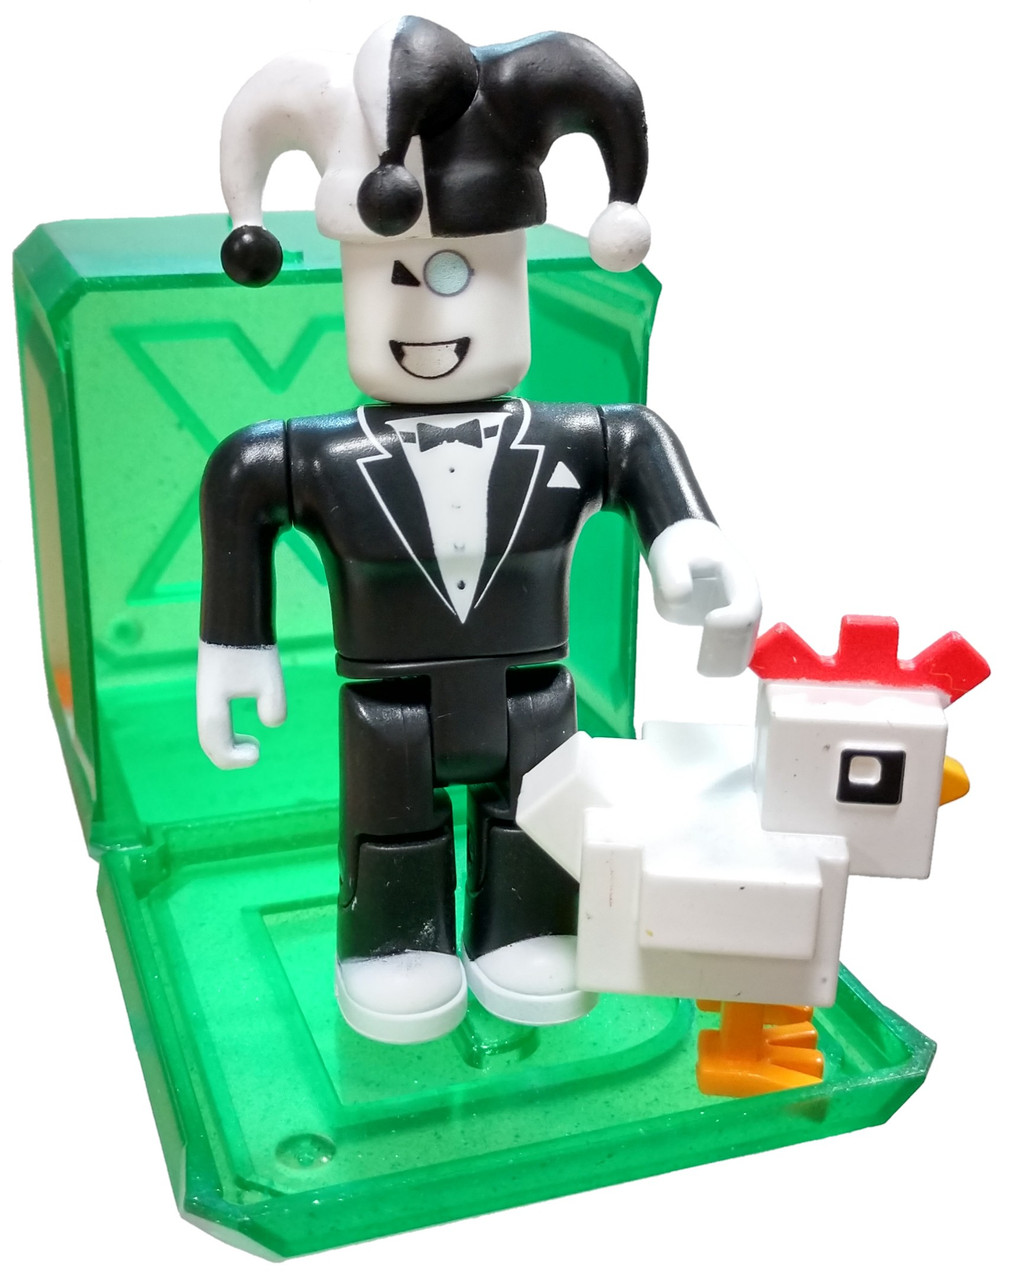 Roblox Celebrity Collection Series 4 Sirming 3 Mini Figure With Green Cube And Online Code Loose Jazwares Toywiz - details about roblox celebrity core figure pack series 1 assorted brand new x4